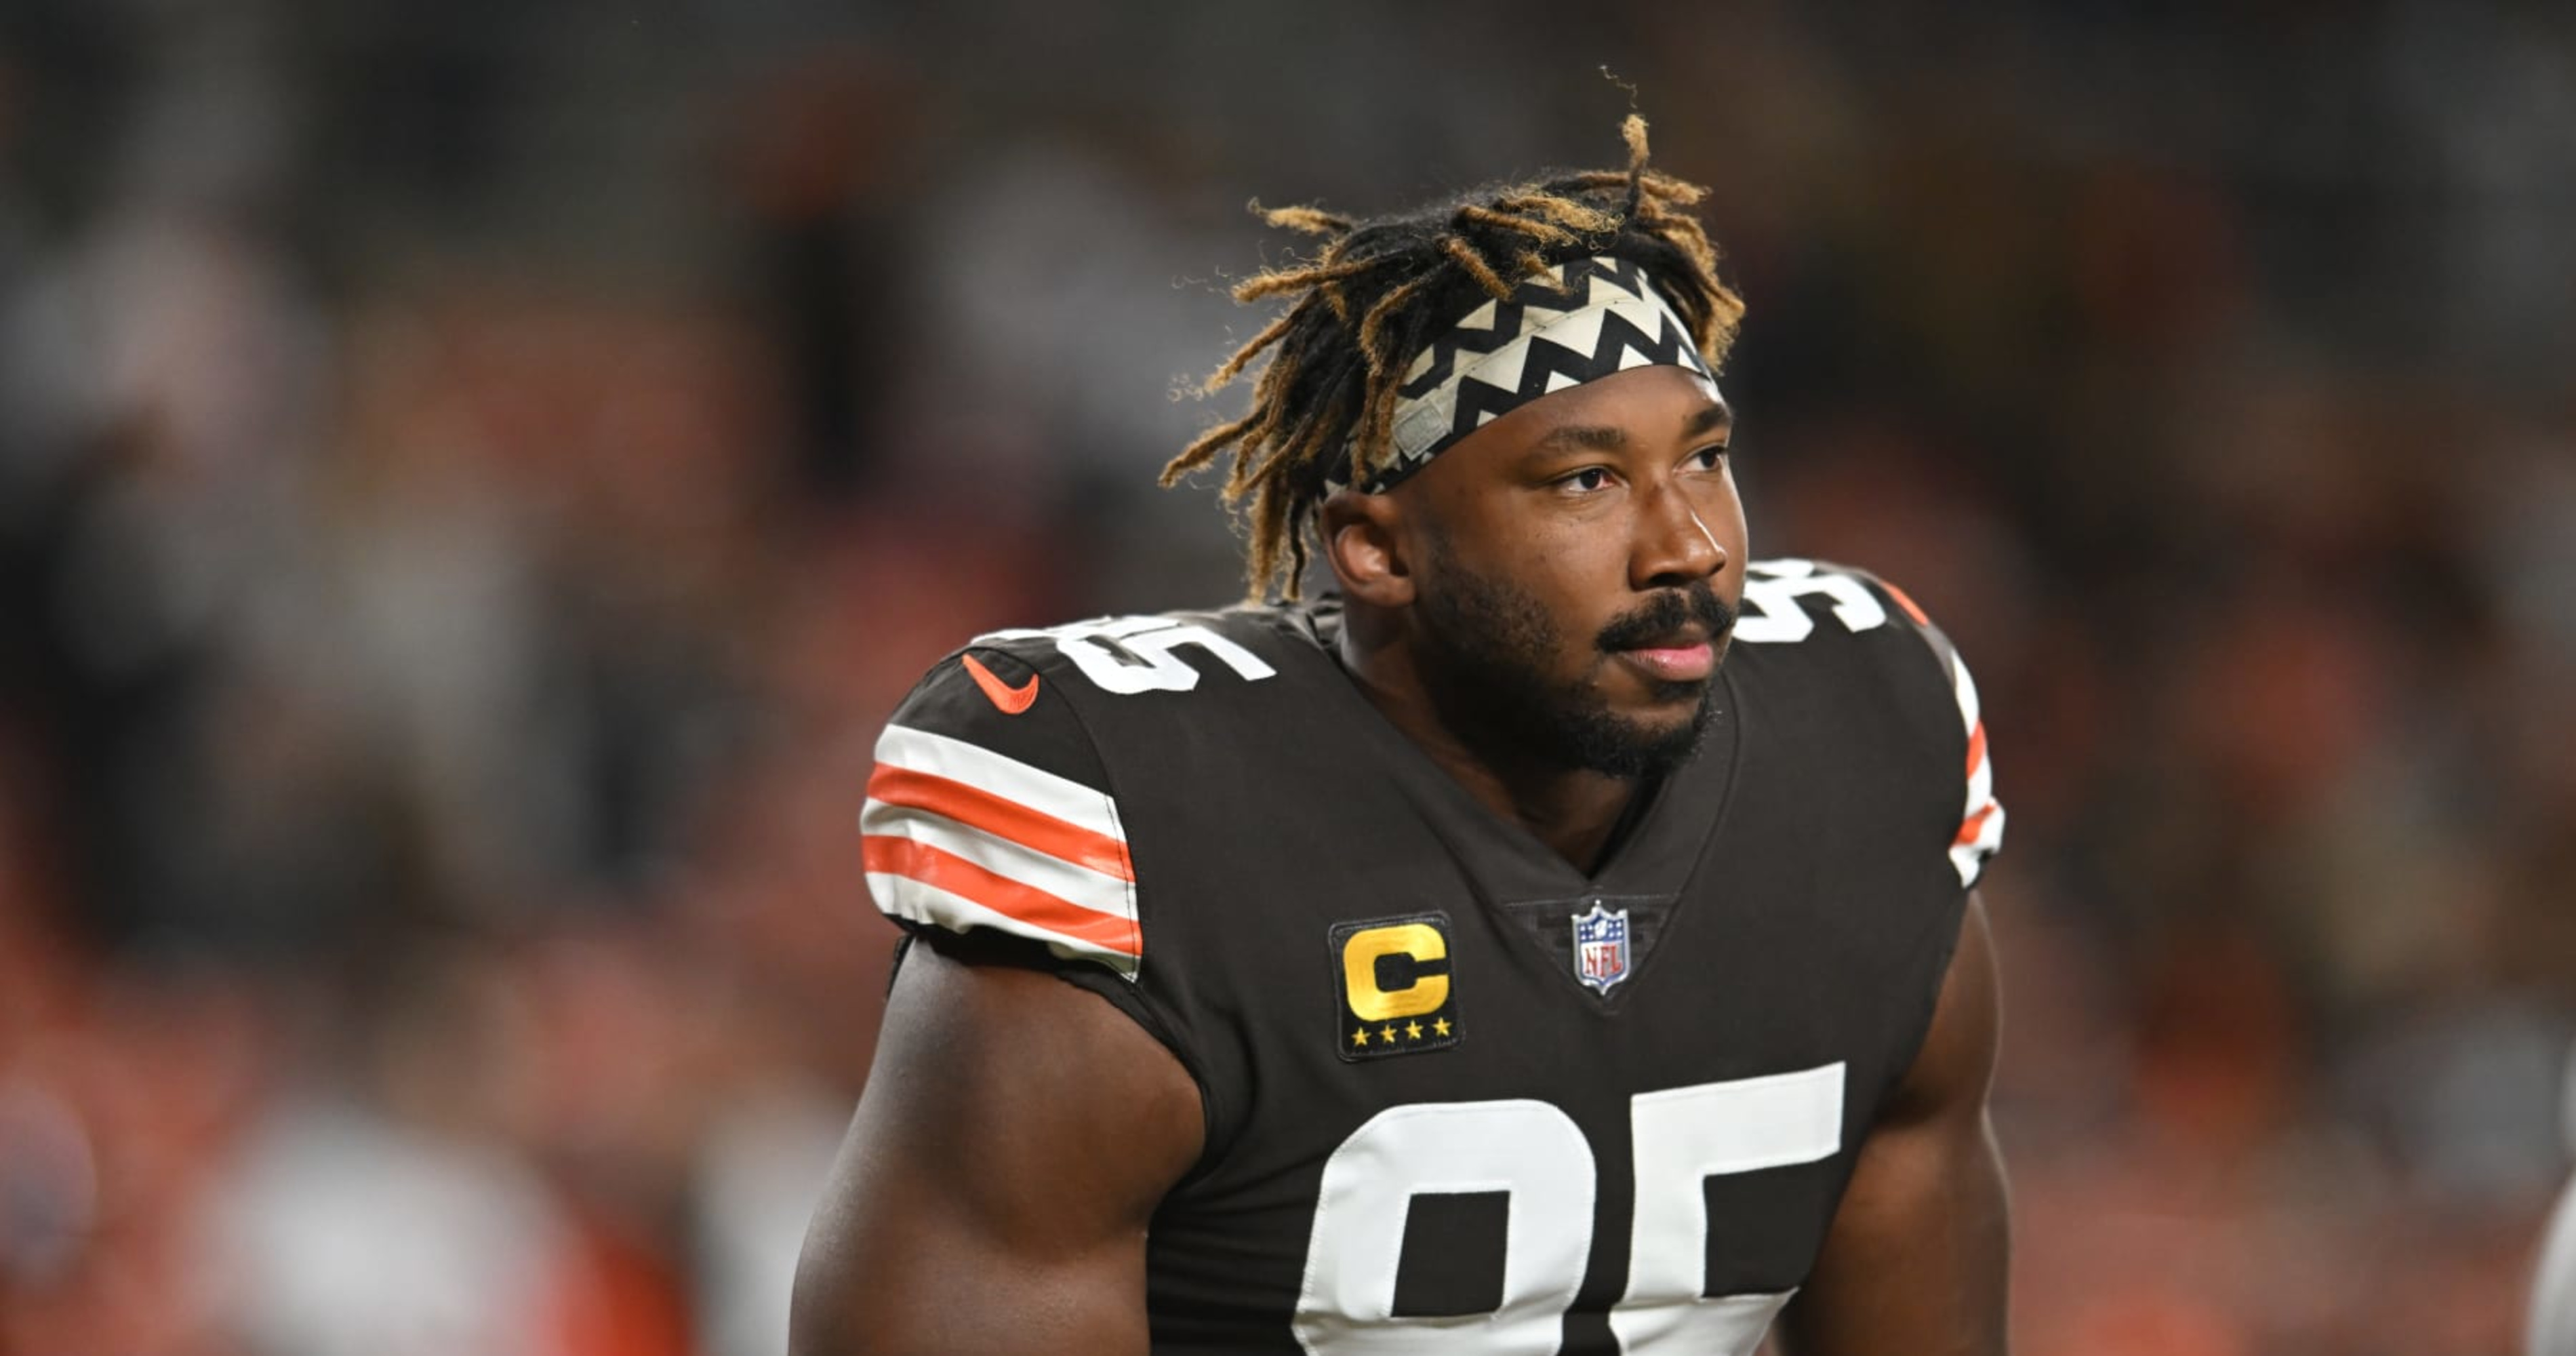 Browns' Myles Garrett Reportedly Released from Hospital After Car Crash